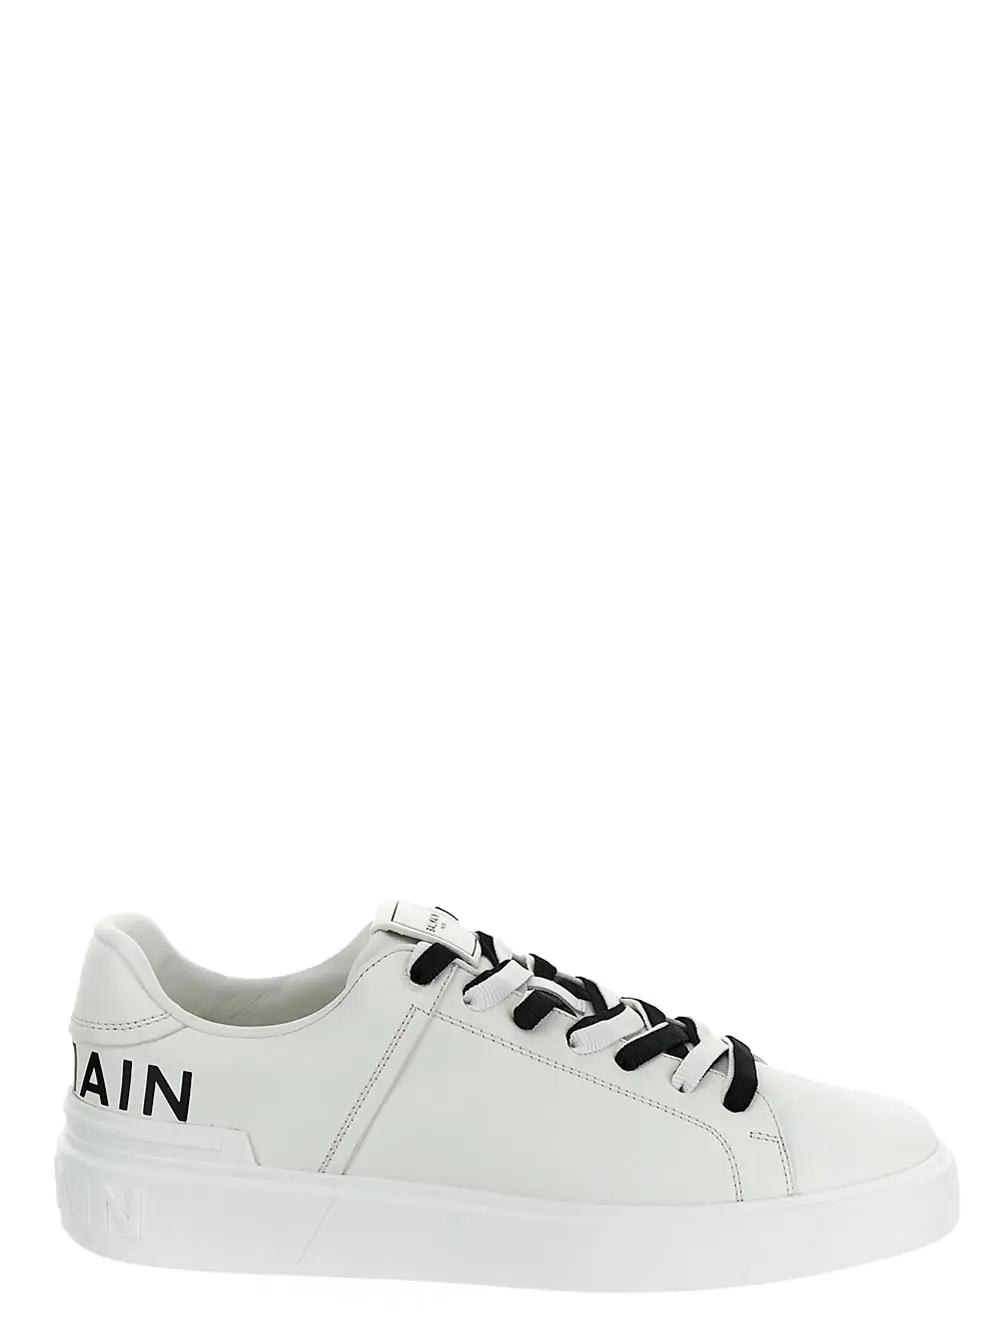 Balmain B-court Smooth Leather Trainers